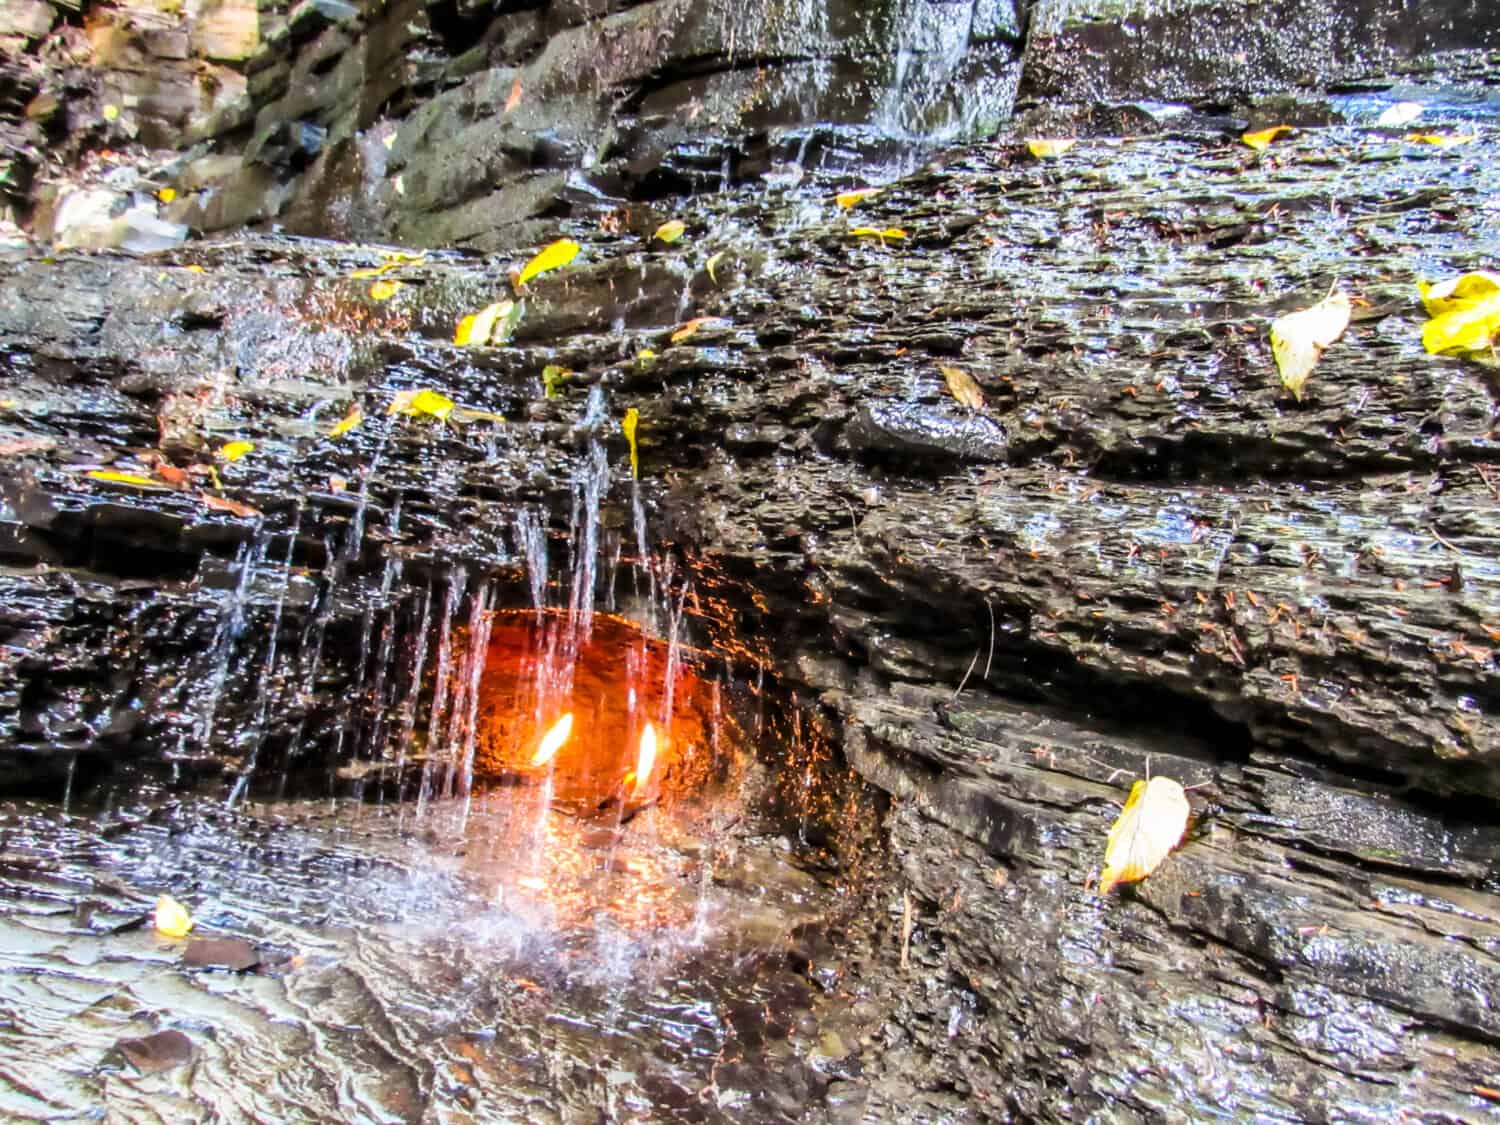 Eternal Flame Falls located in Orchard Park, New York